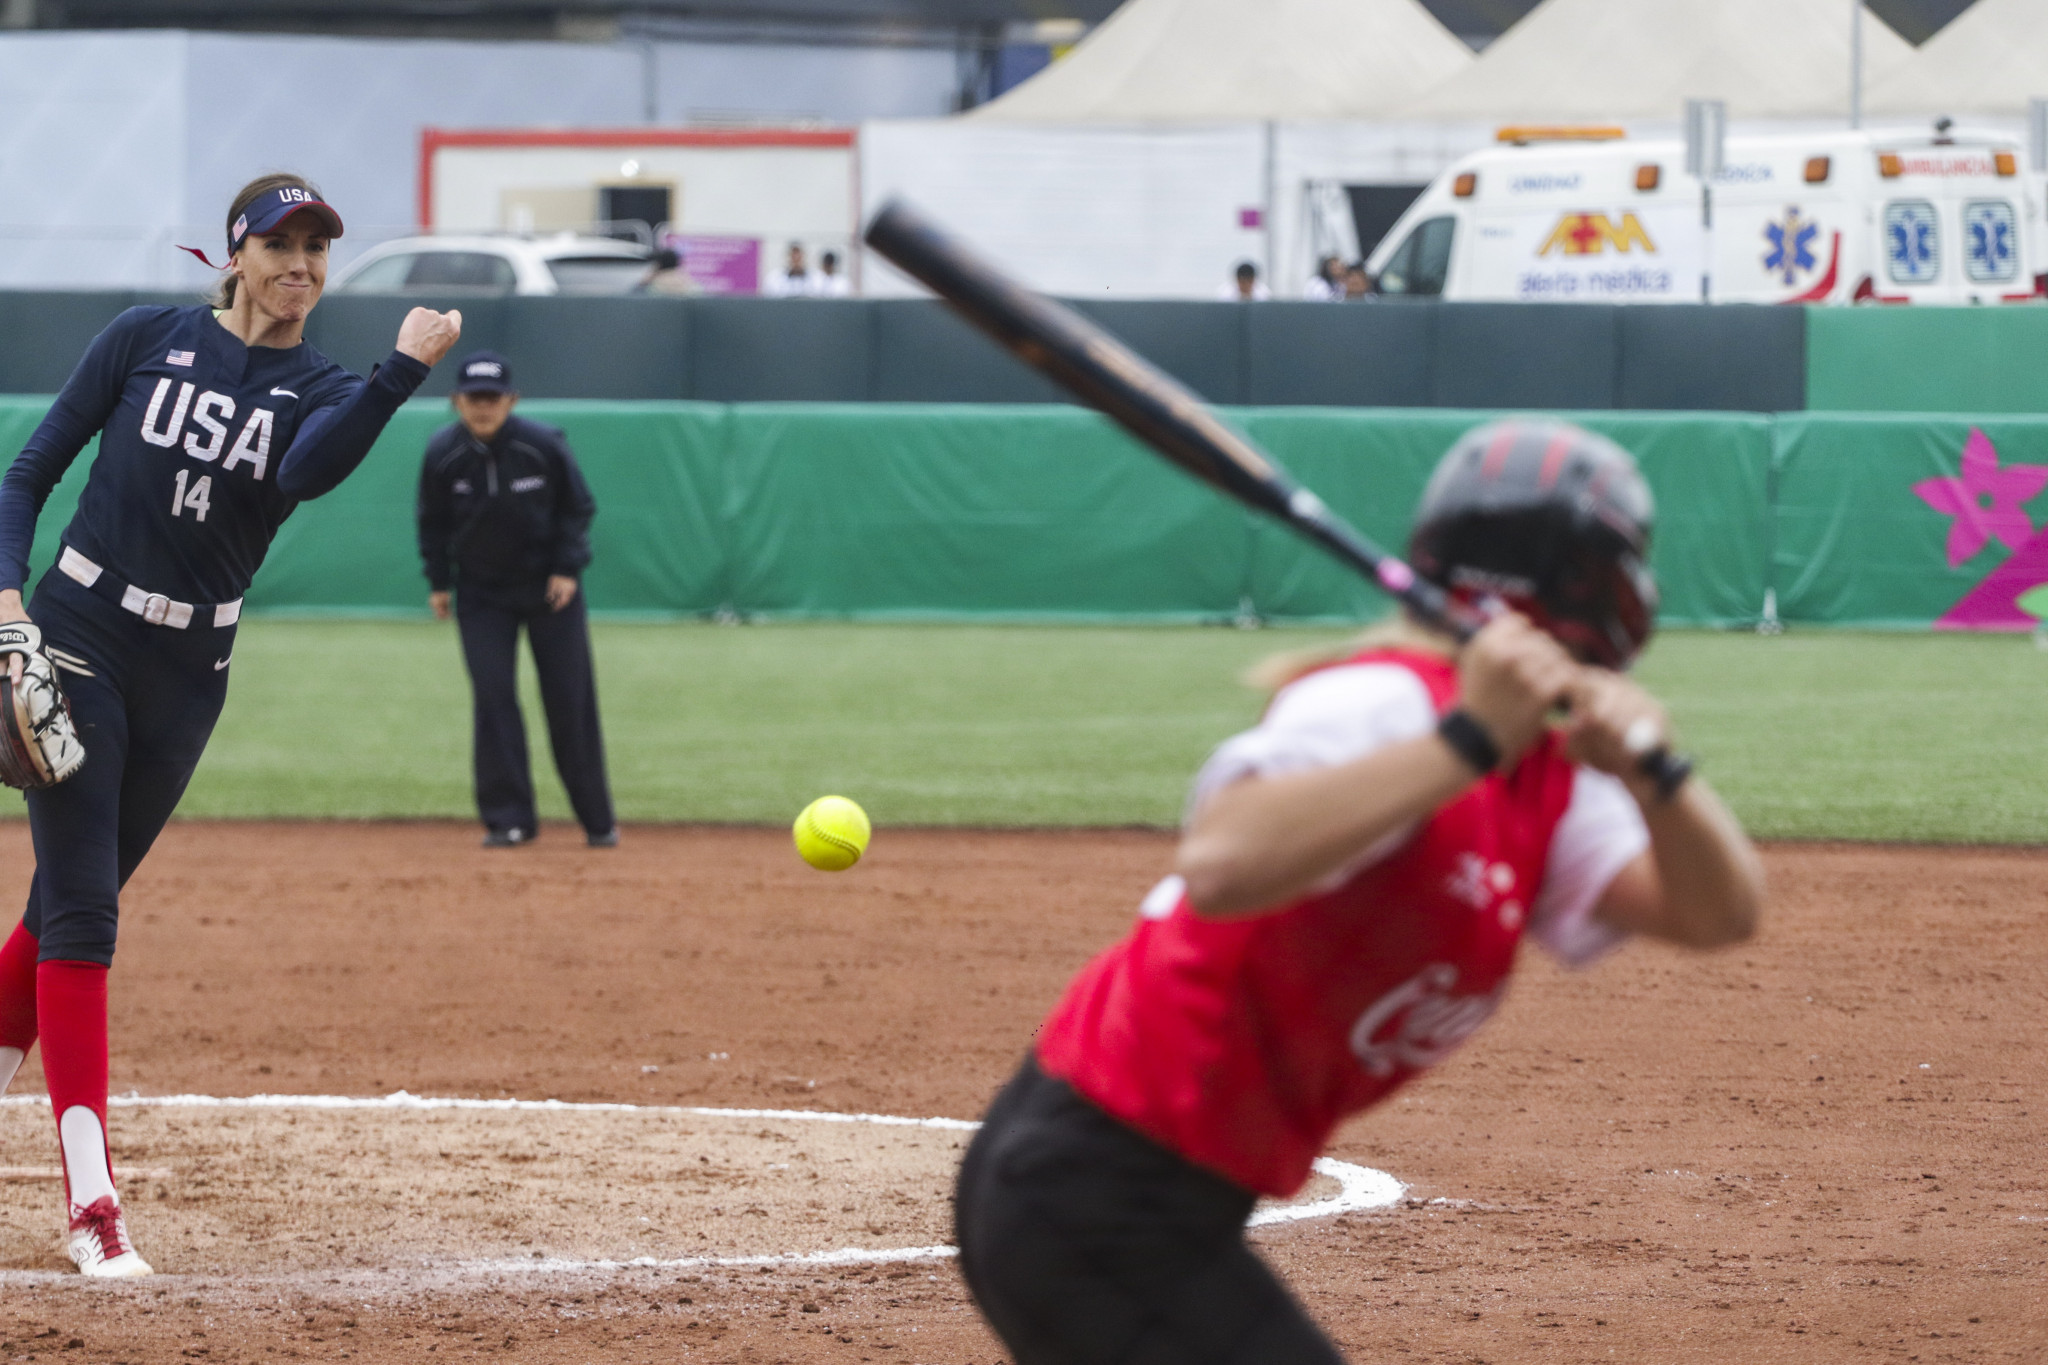 The US also came up against Canada in the grand final of the women's softball ©Lima 2019